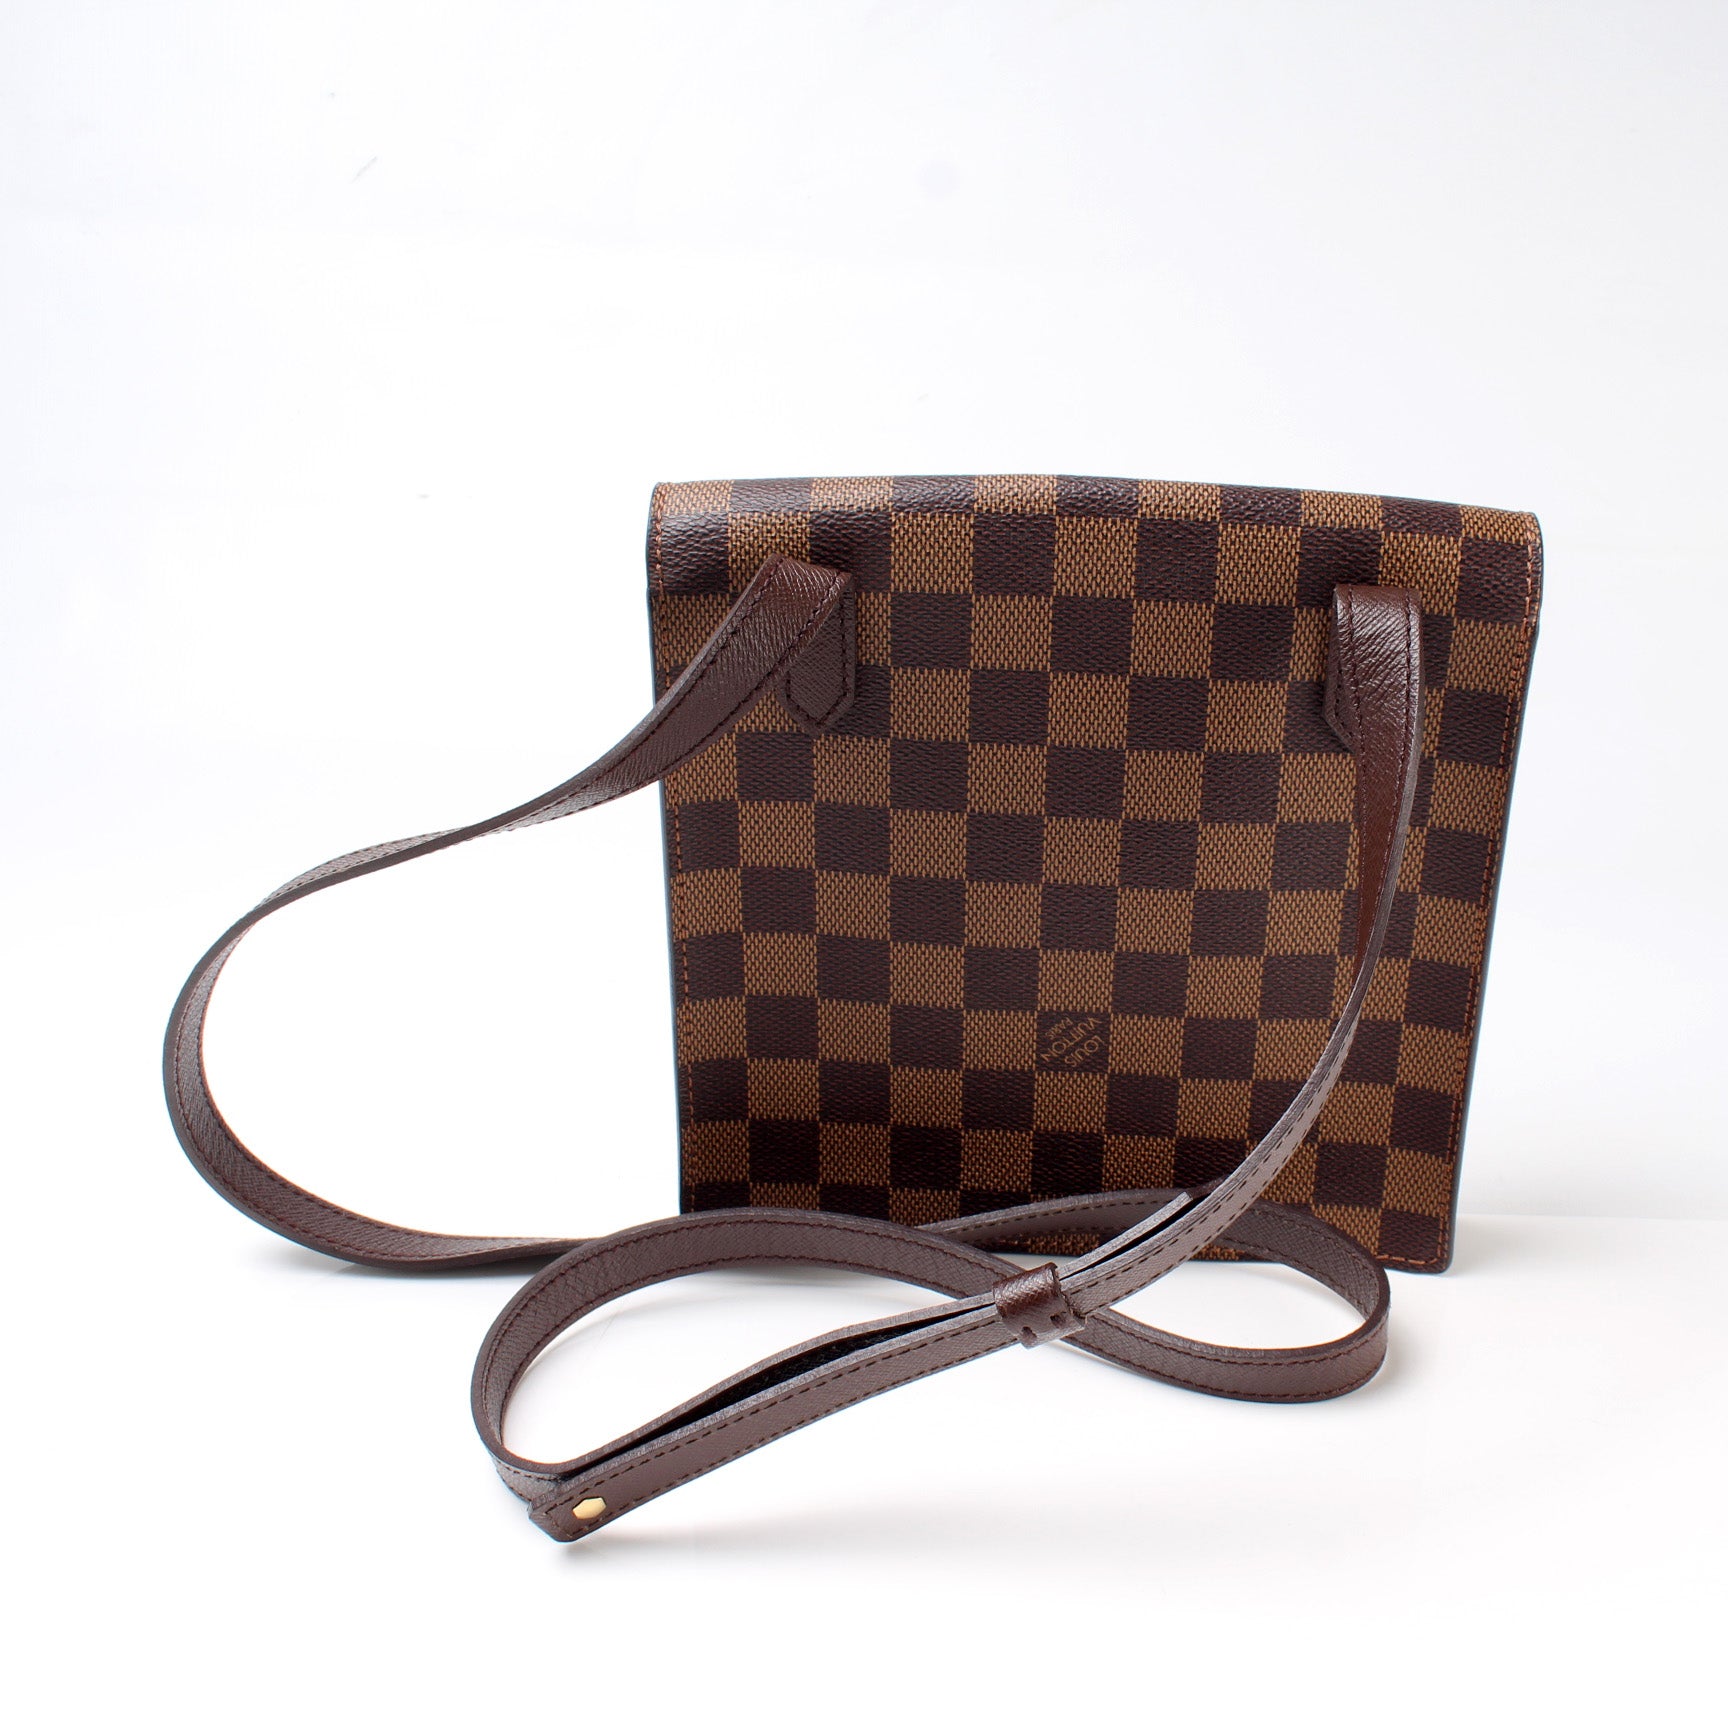 Louis Vuitton - Authenticated Pimlico Handbag - Leather Brown for Women, Good Condition